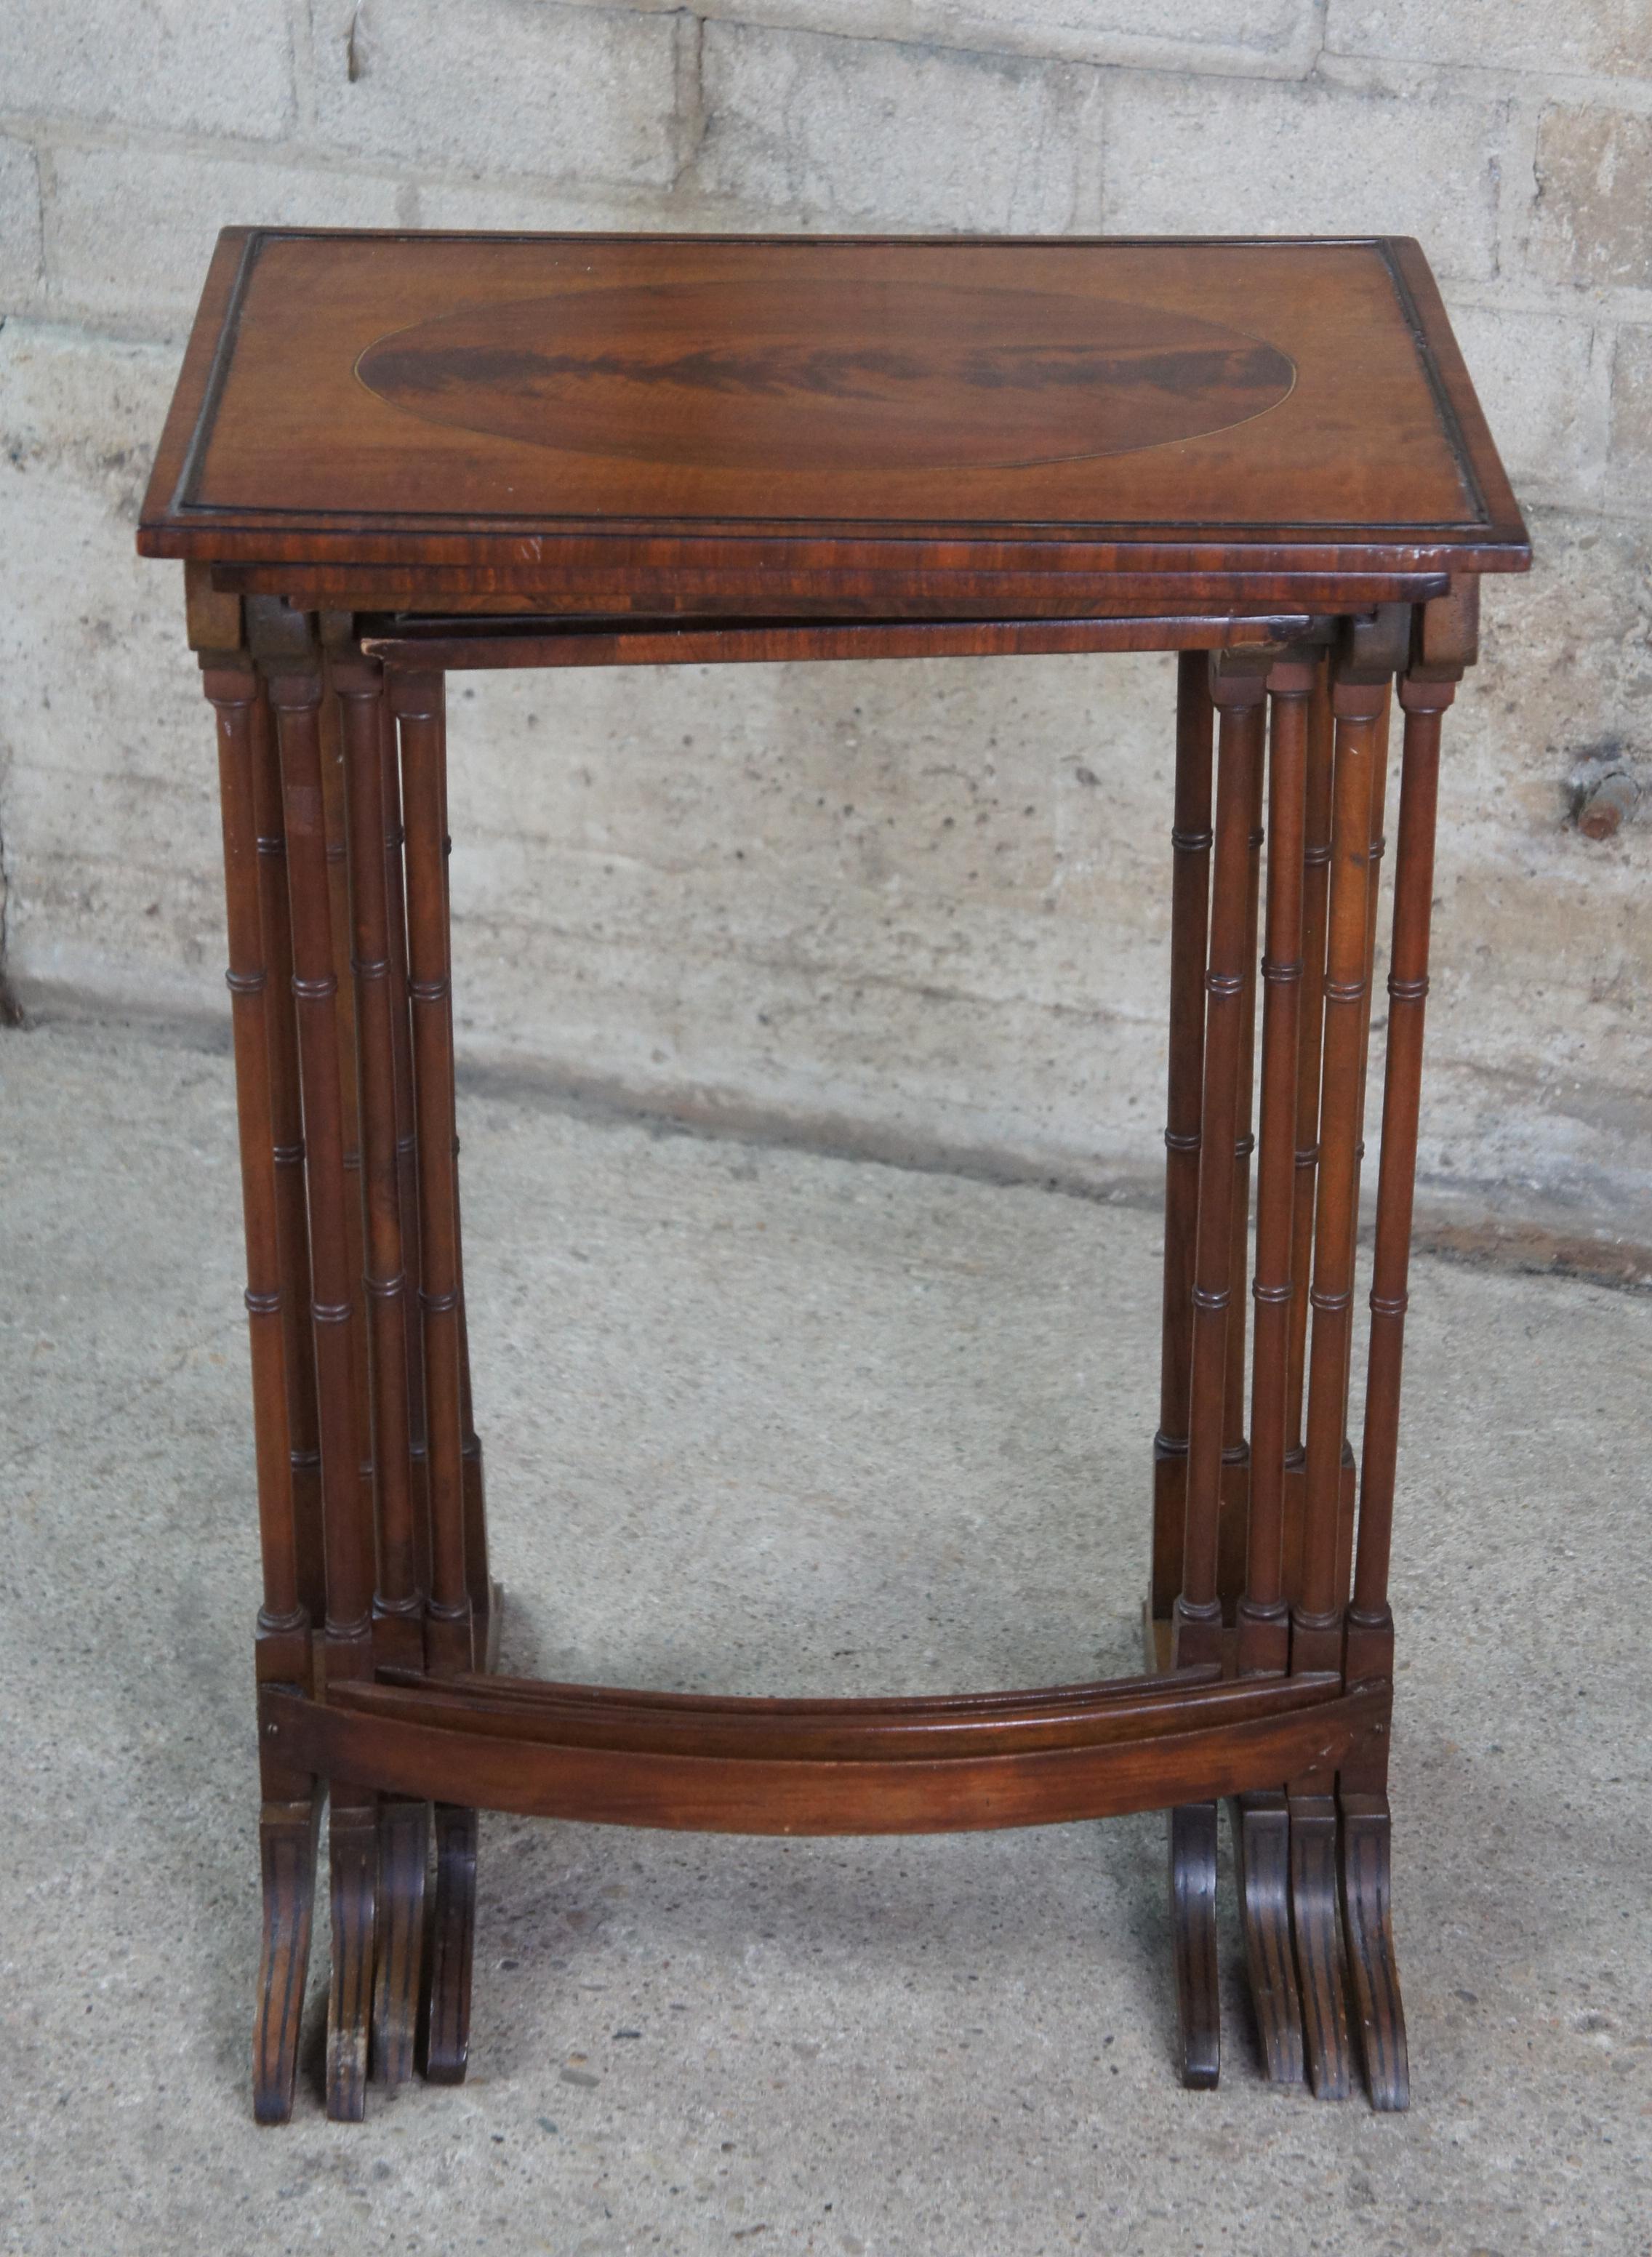 4 Antique Regency Flame Mahogany Inlaid Nesting Side Accent Tables Sheraton 2